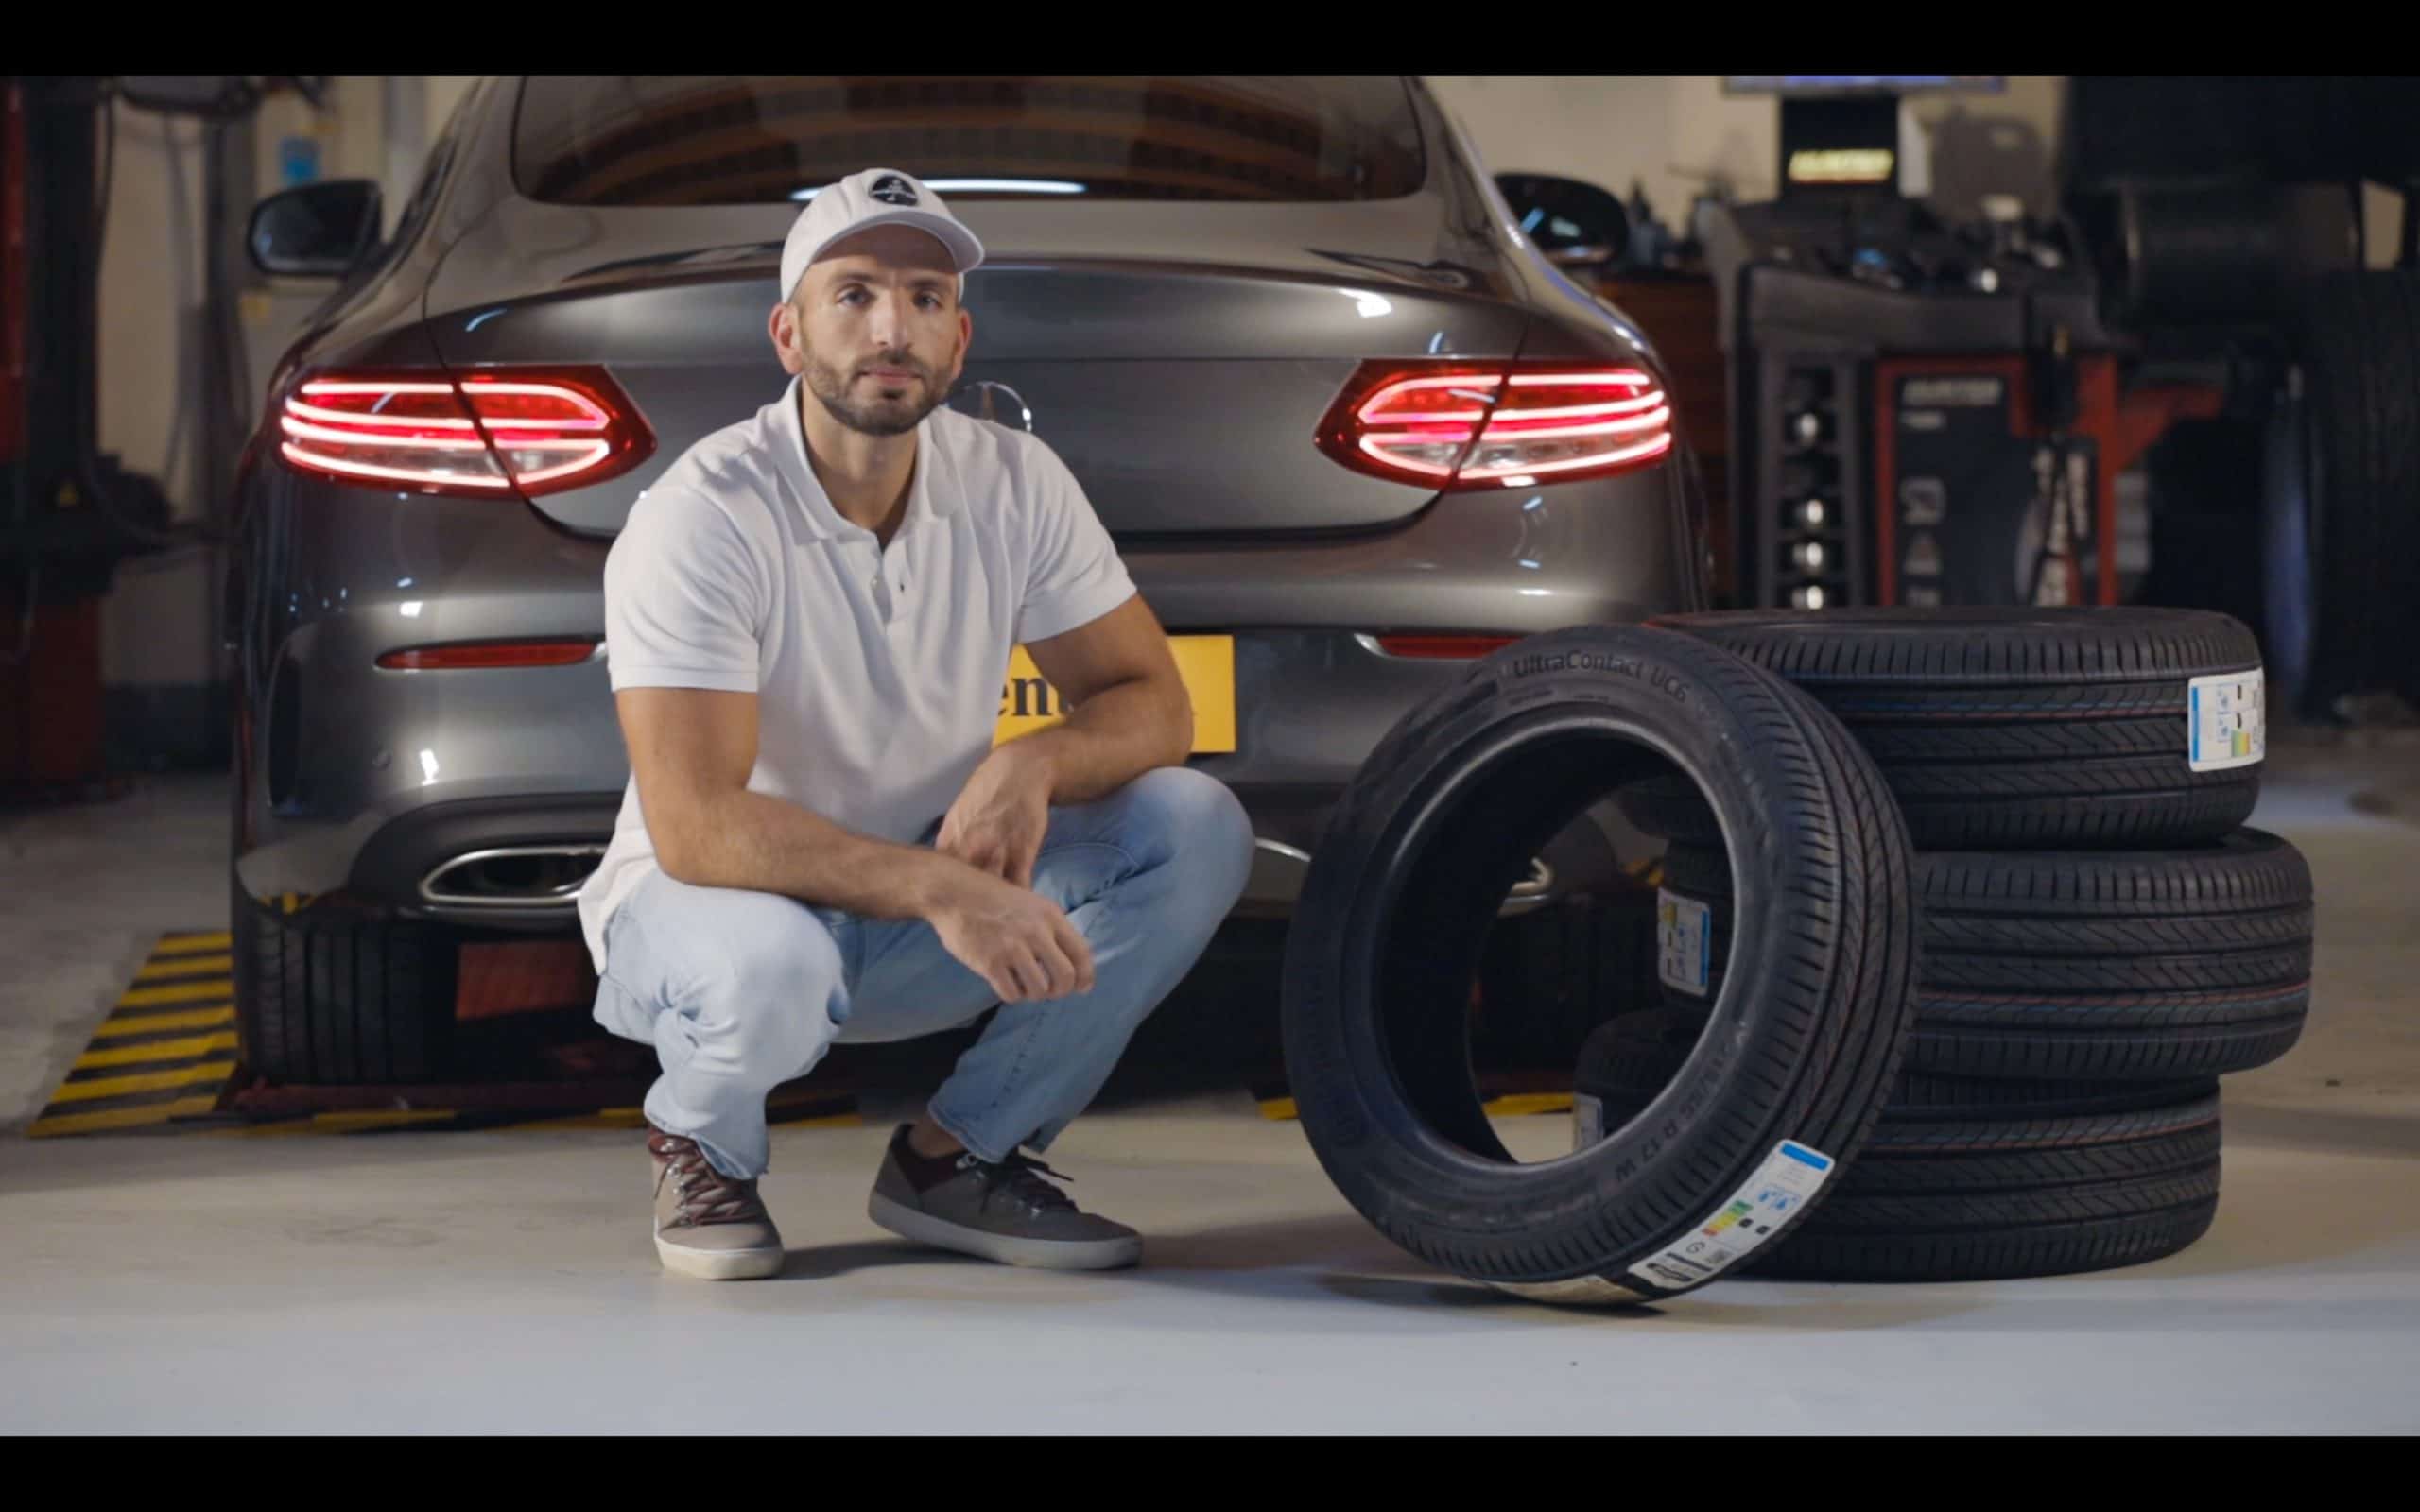 Continental launches ‘Made For Your Drive’ campaign to highlight the importance of choosing tyres that suit customers’ lifestyles